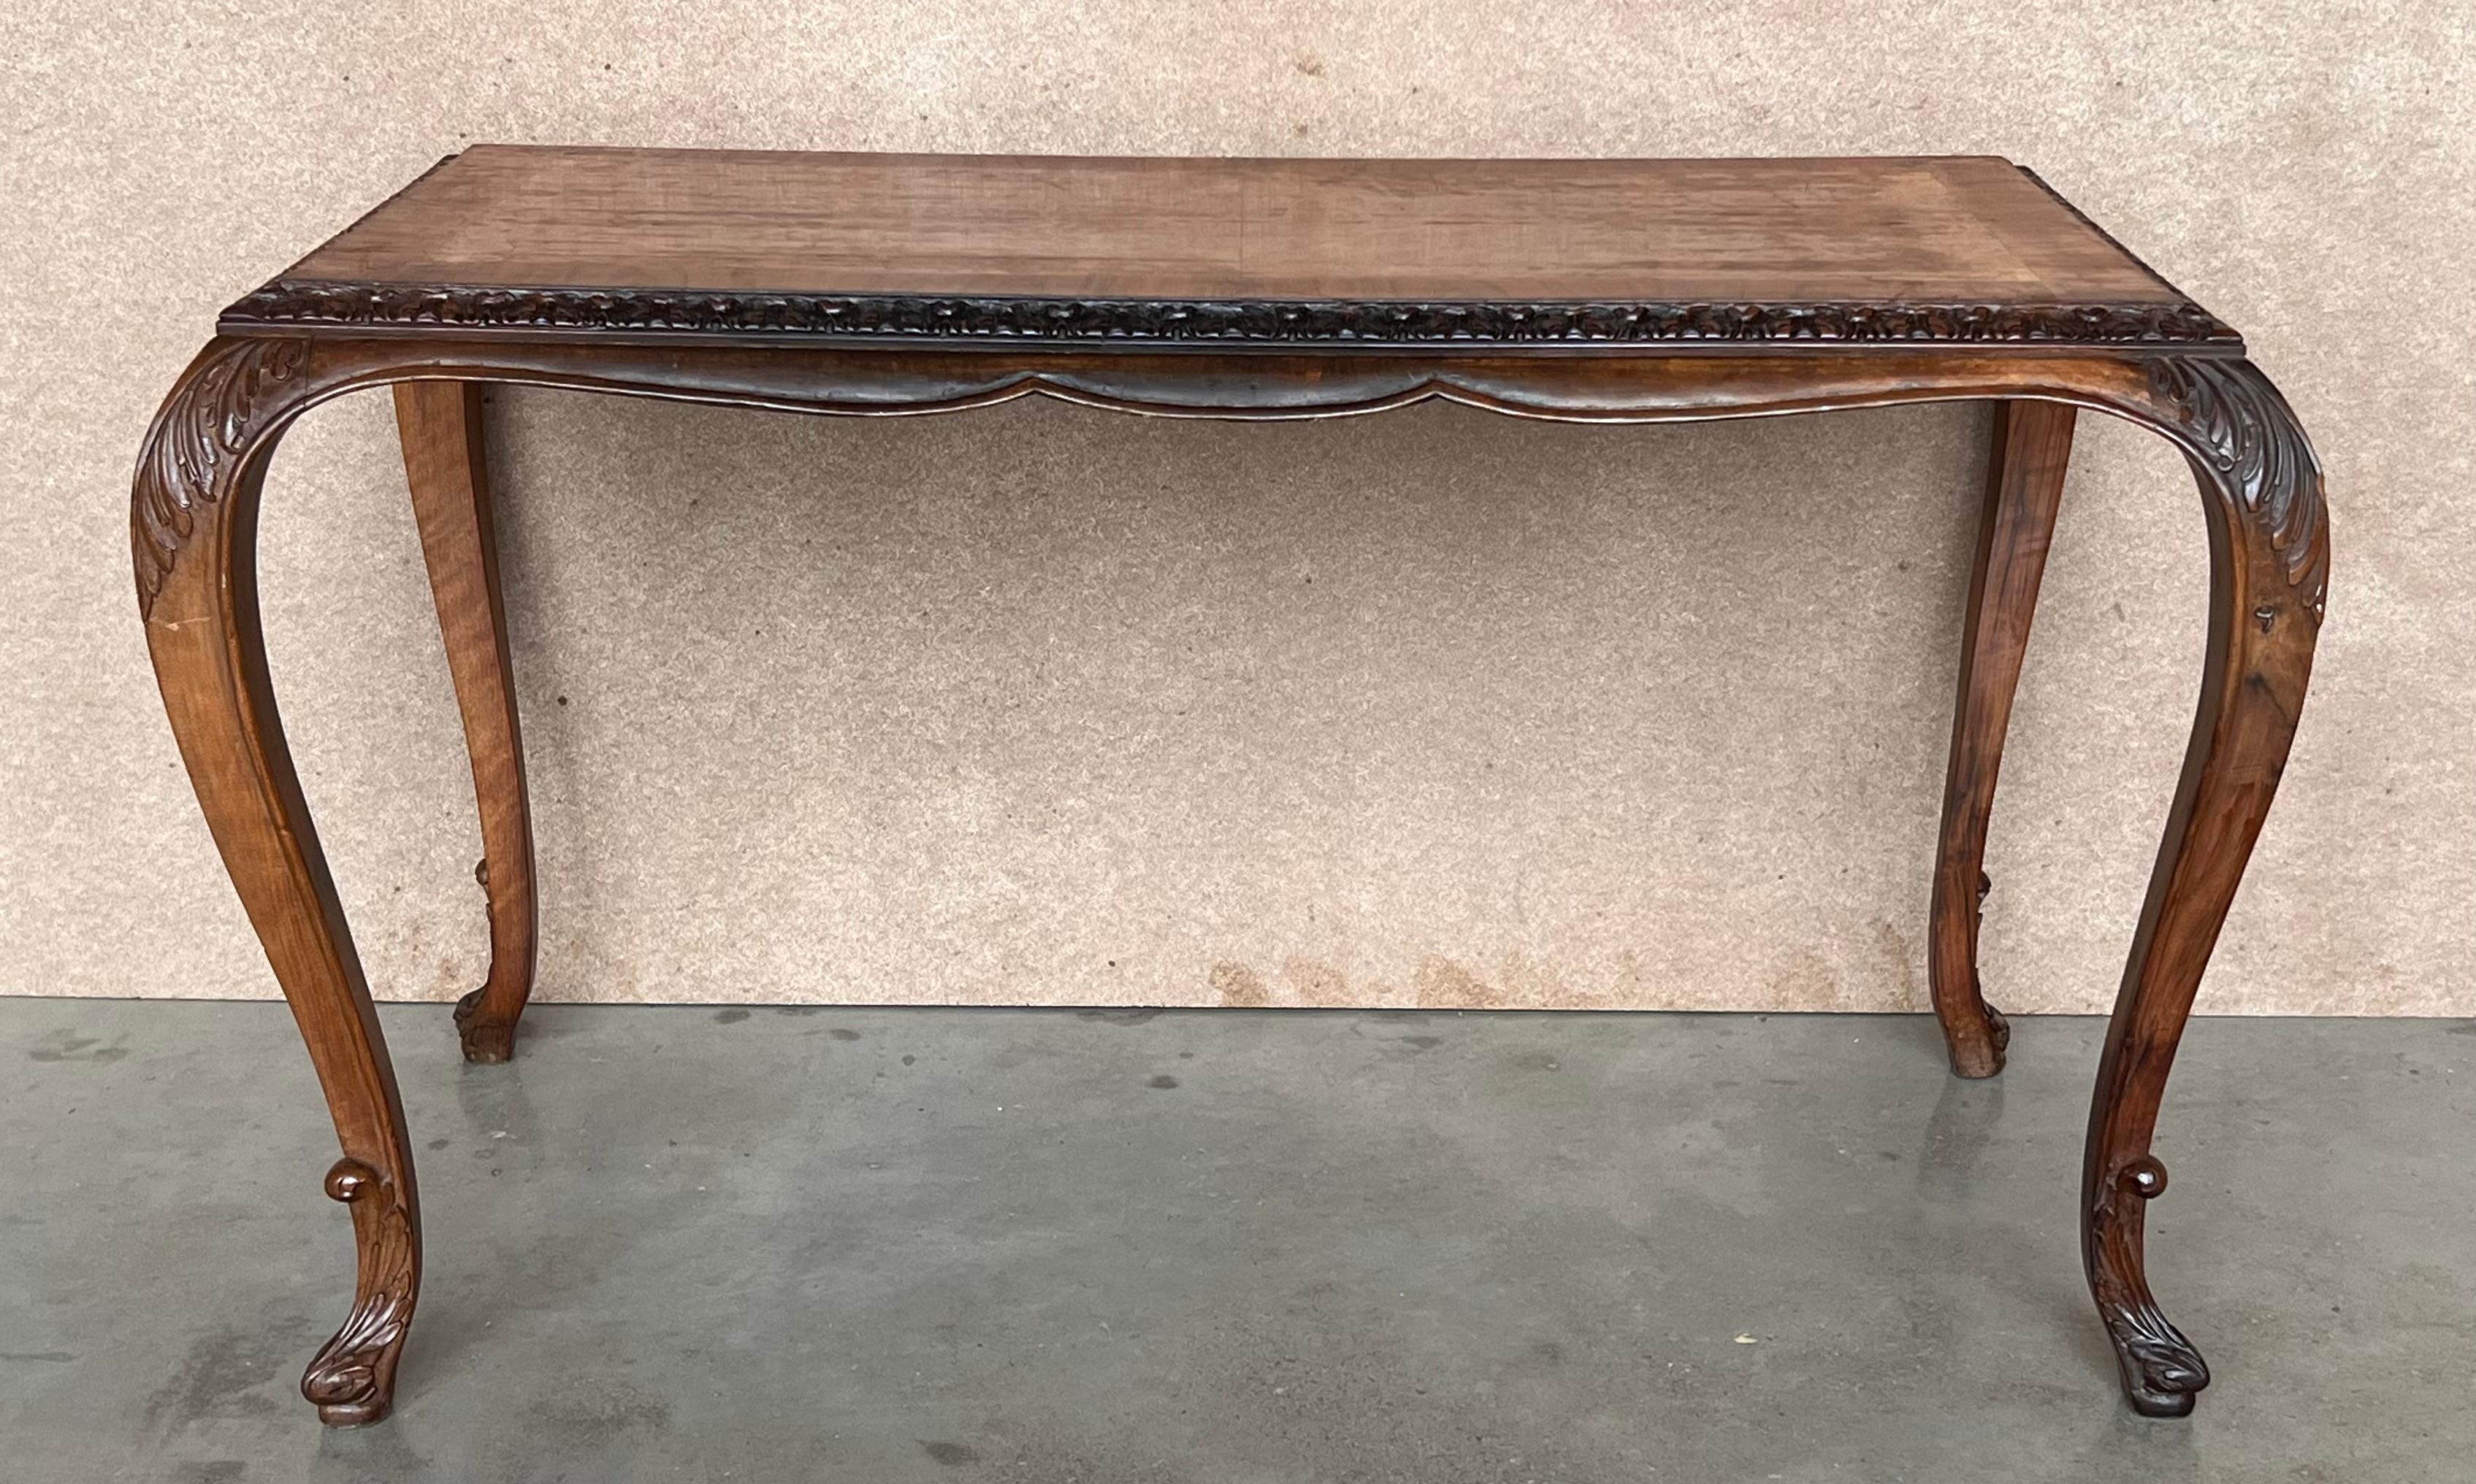 A fantastic antique walnut coffee table in the Queen Anne Style. This was made in England, it dates from around the 1930’s. The quality is outstanding, this has deep and intricate carving around the serpentine shaped edges. The cabriole legs also